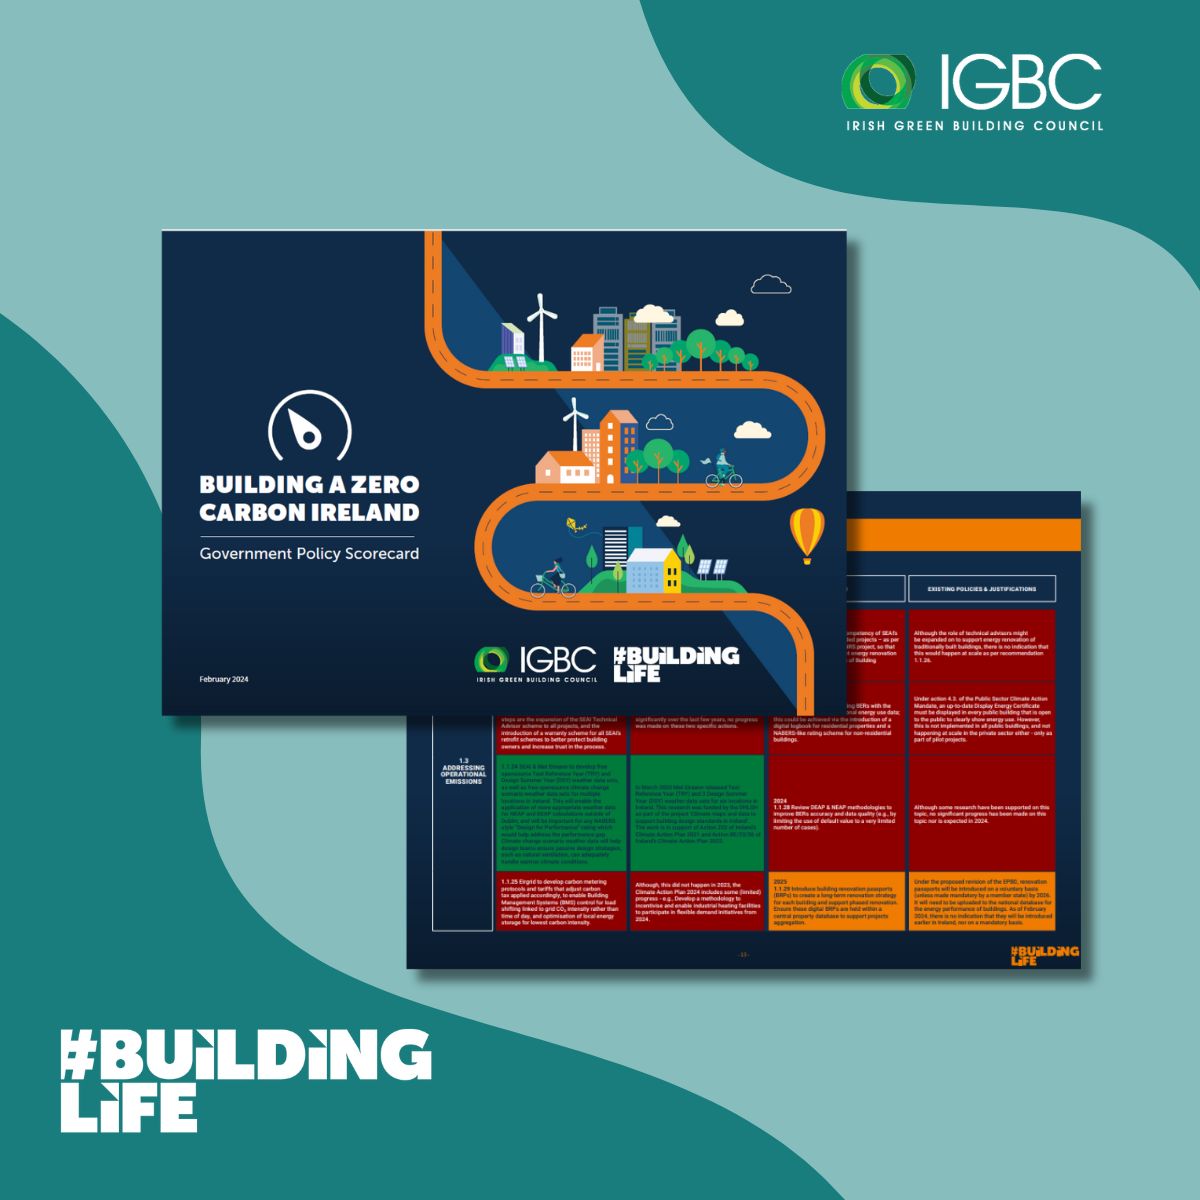 Discover our #BuildingLife Policy Scorecard 📊 We launched a Roadmap in 2022 to #decarbonise 🇮🇪 built environment. Now, with our Scorecard, we track progress, highlight policy gaps, and focus efforts. Full document ➡️ igbc.ie/resources/buil…